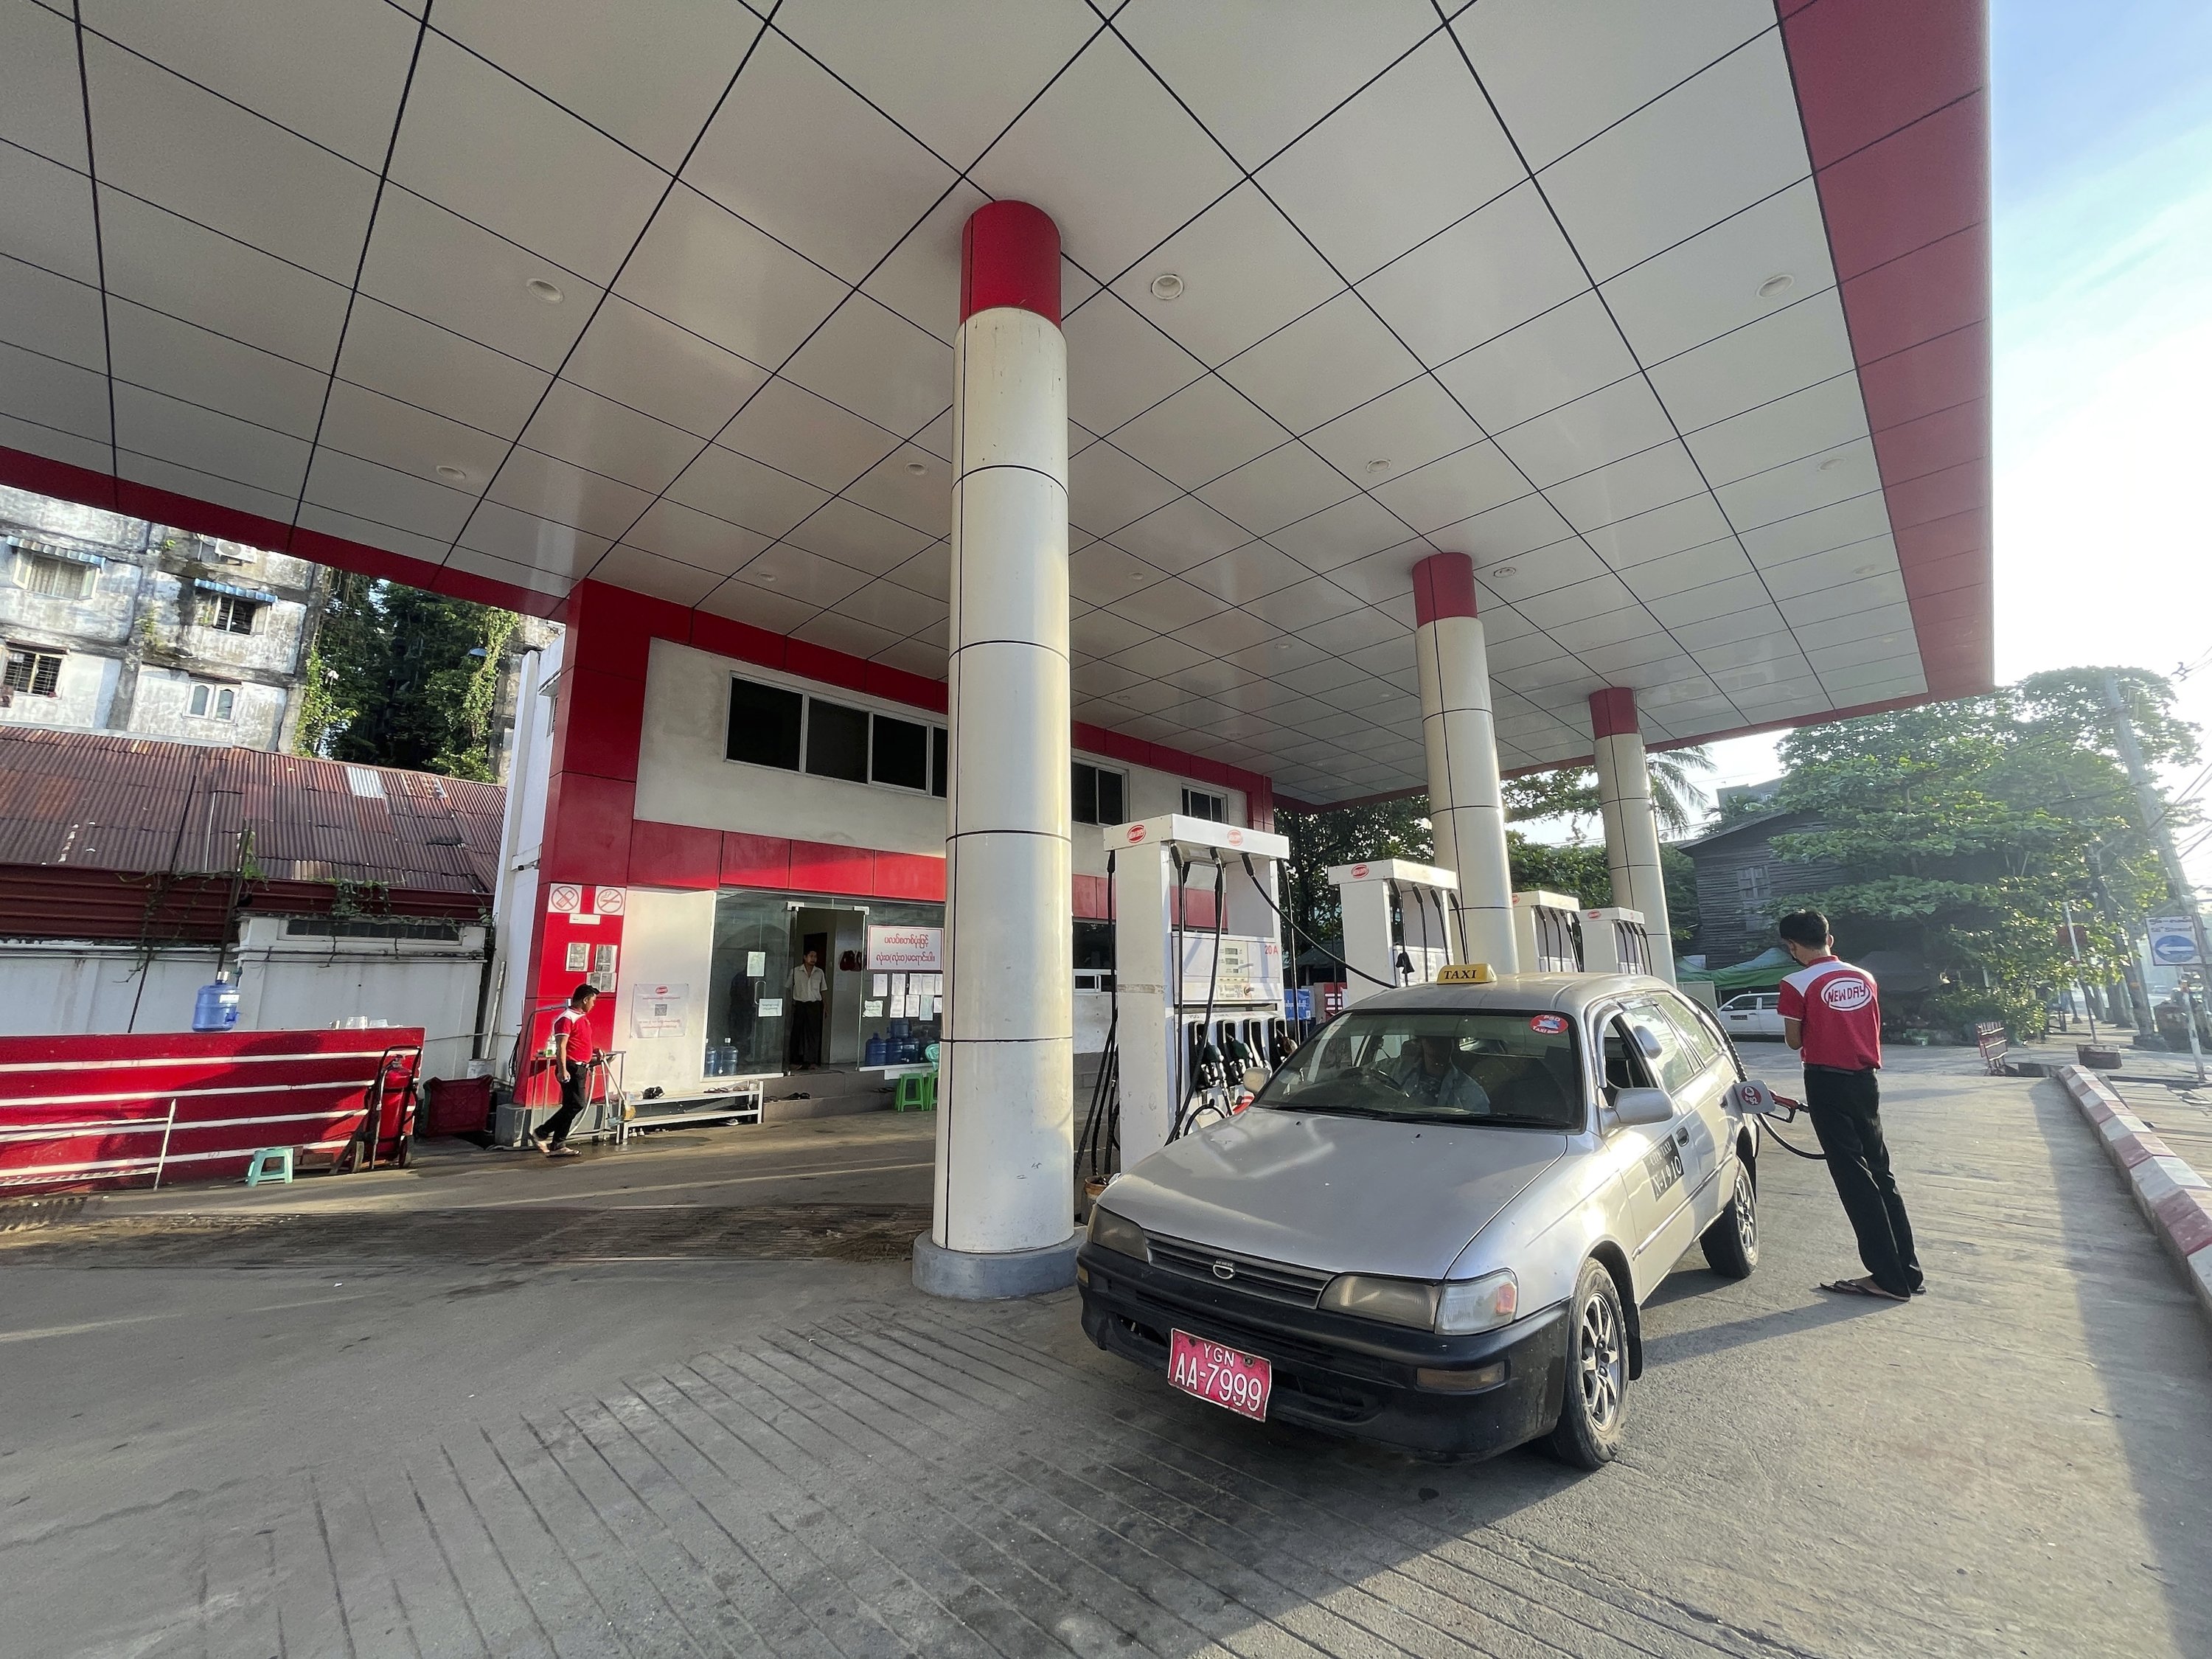 An attendant pumps fuel into a taxi at a gas station in Botahtaung township in Yangon, Myanmar, Nov. 12, 2021. (AP Photo)